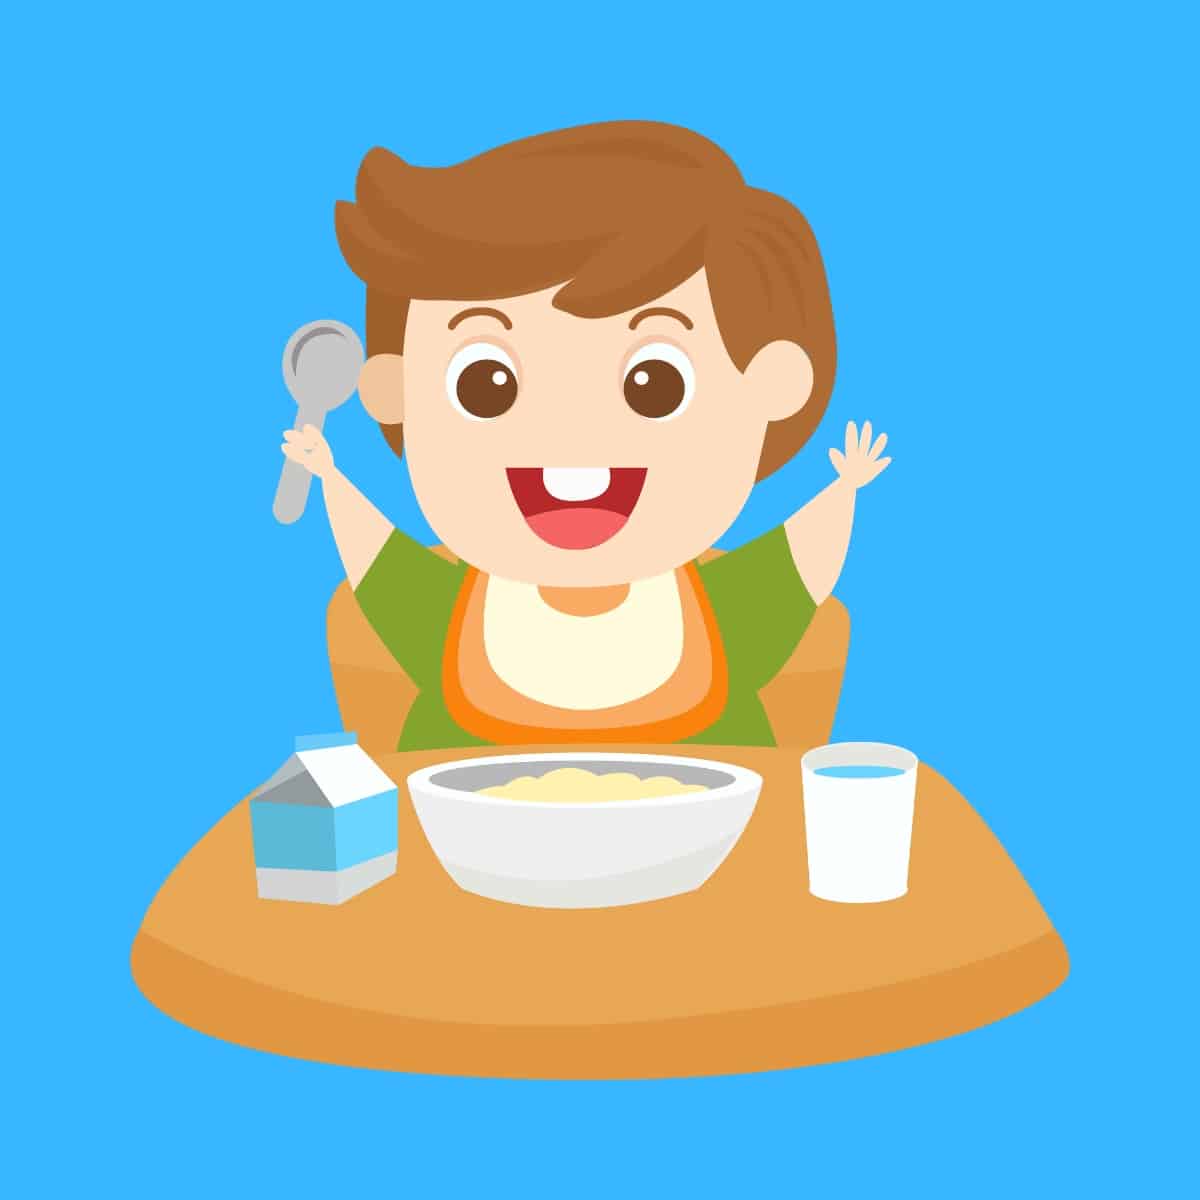 Cartoon graphic of a young boy eating breakfast at the table with his hands in the air on a blue background.